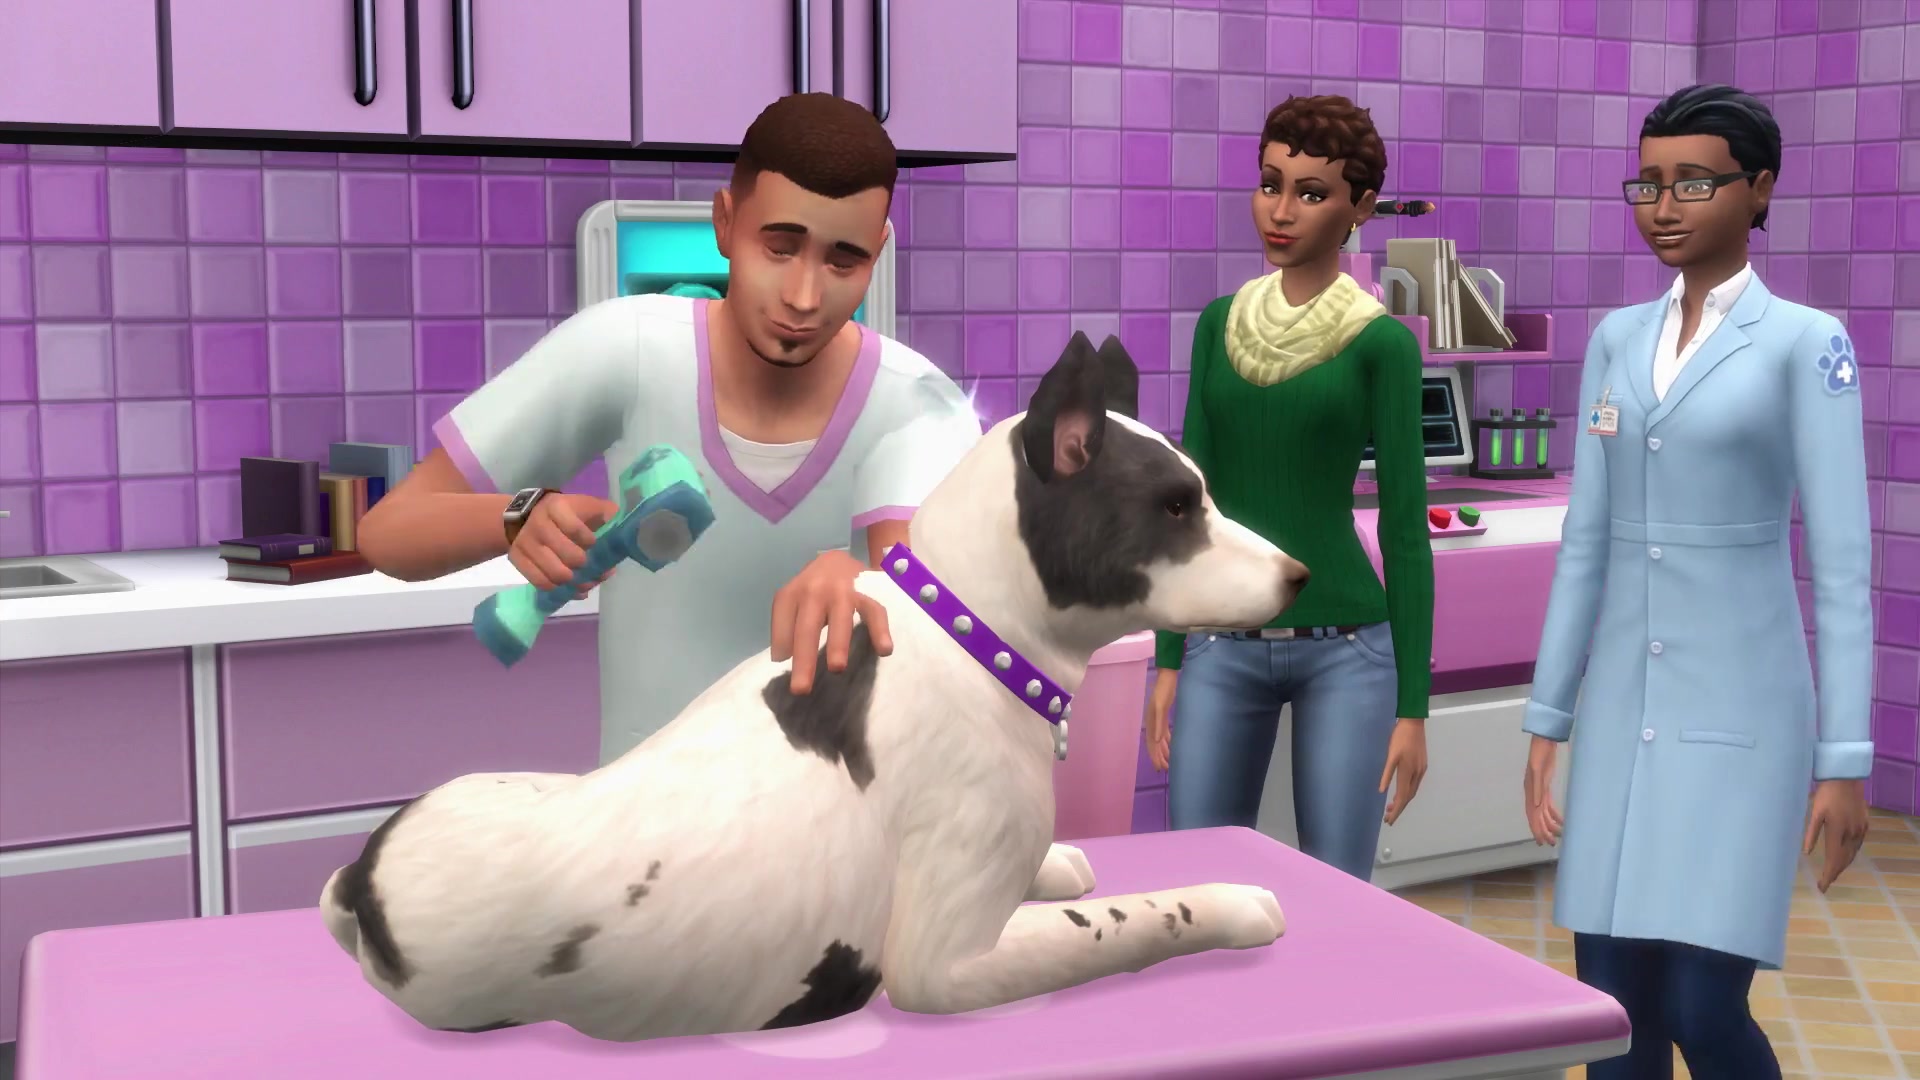 The Sims 4 Cats And Dogs Sims Camp Gameplay Overviews List Simsvip